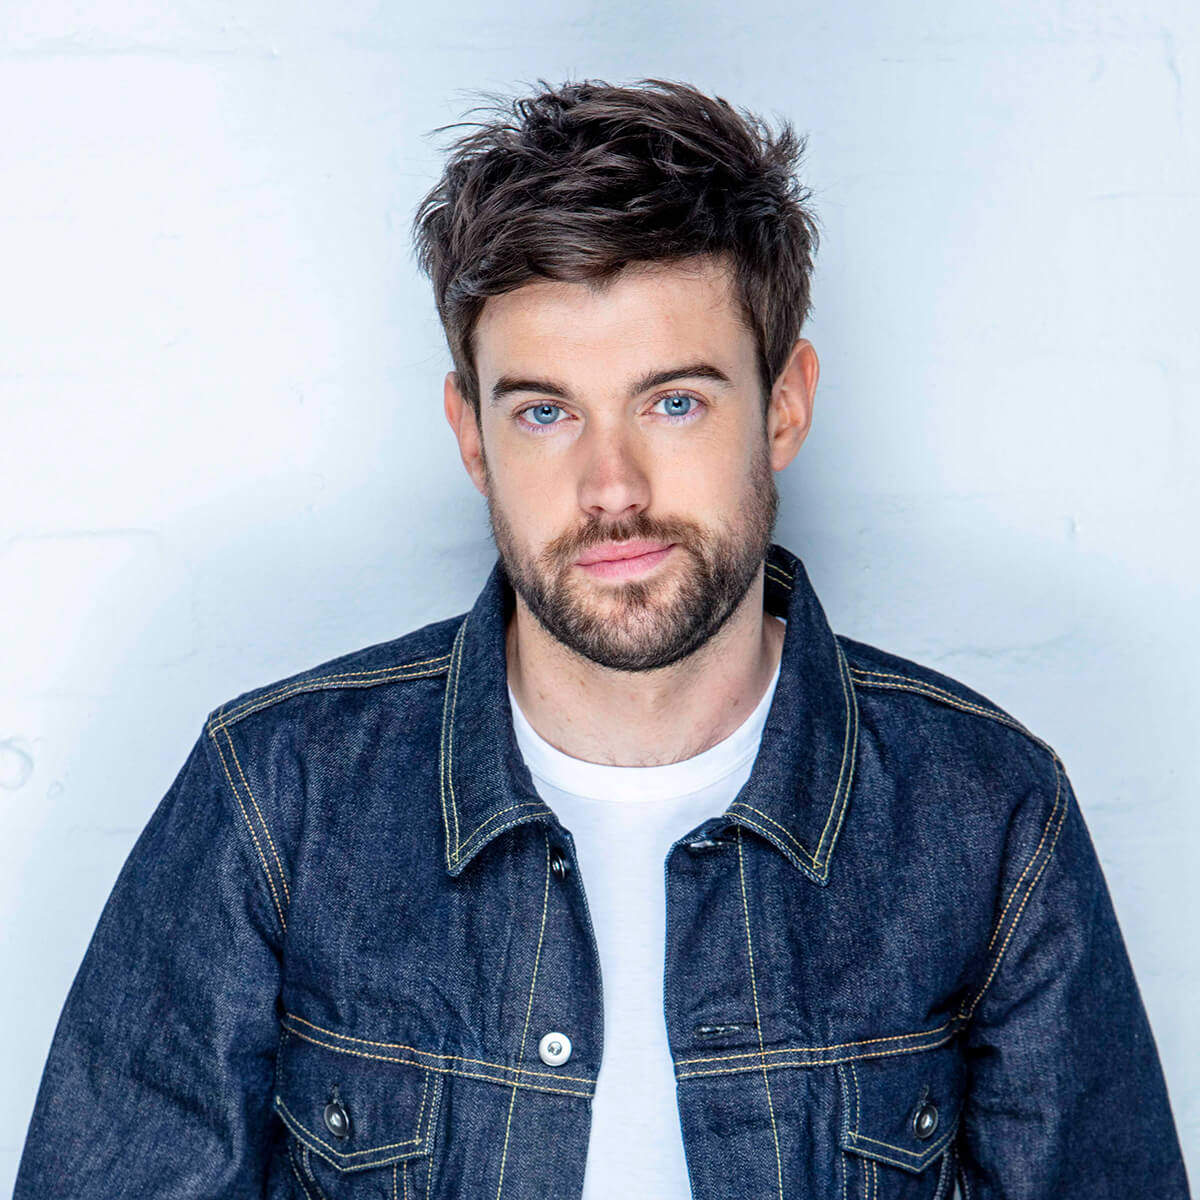 Who Is Comedian Jack Whitehall Brother  Barnaby William?